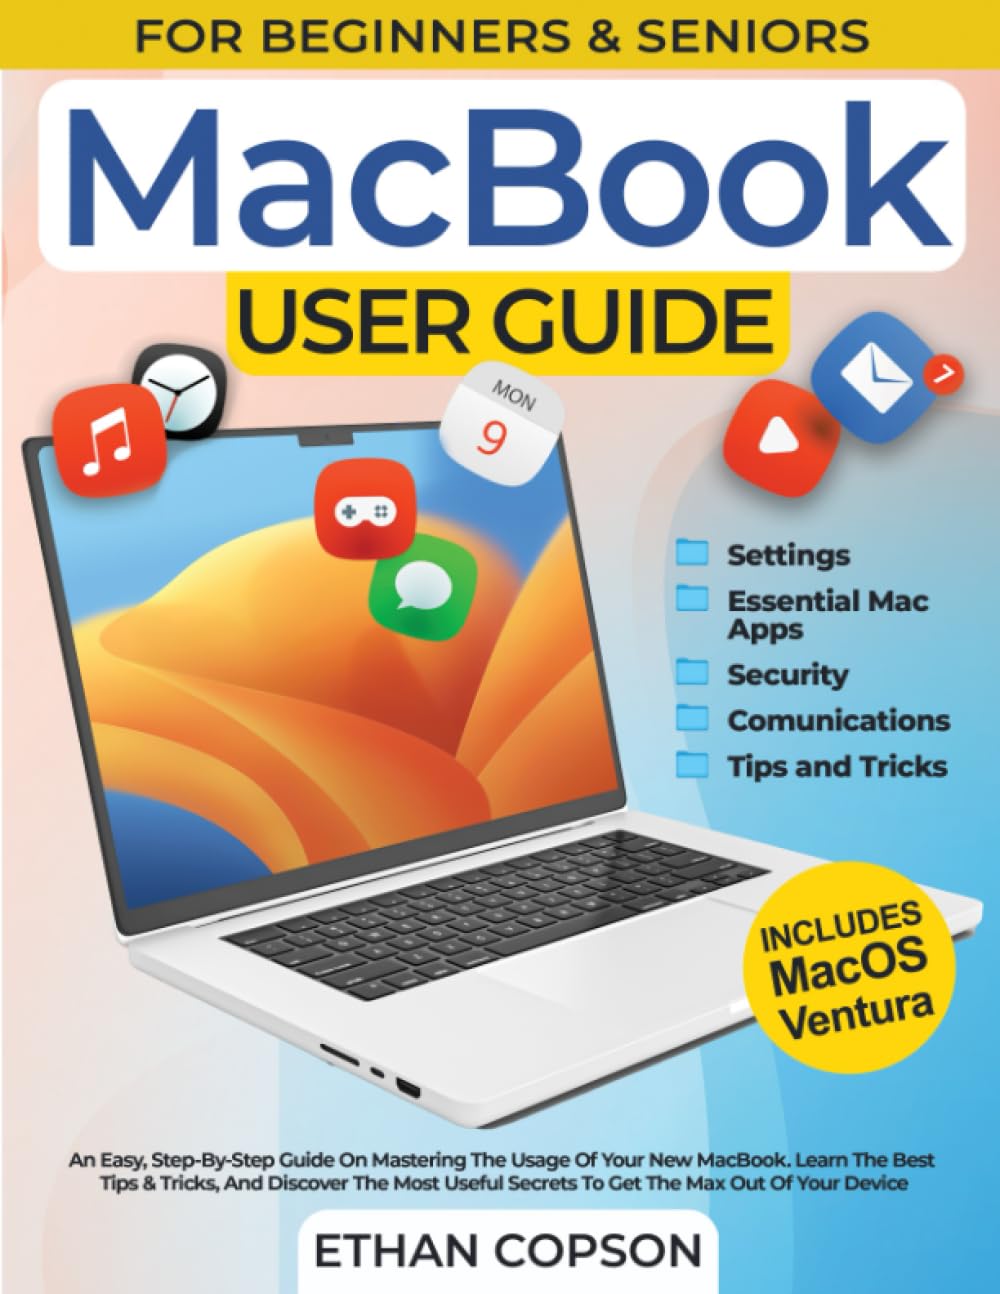 MACBOOK USER GUIDE: An Easy, Step-By-Step Guide On Mastering The Usage Of Your New MacBook. Learn The Best Tips & Tricks, And Discover The Most Useful ... Device (User Guide for Beginners and Seniors)